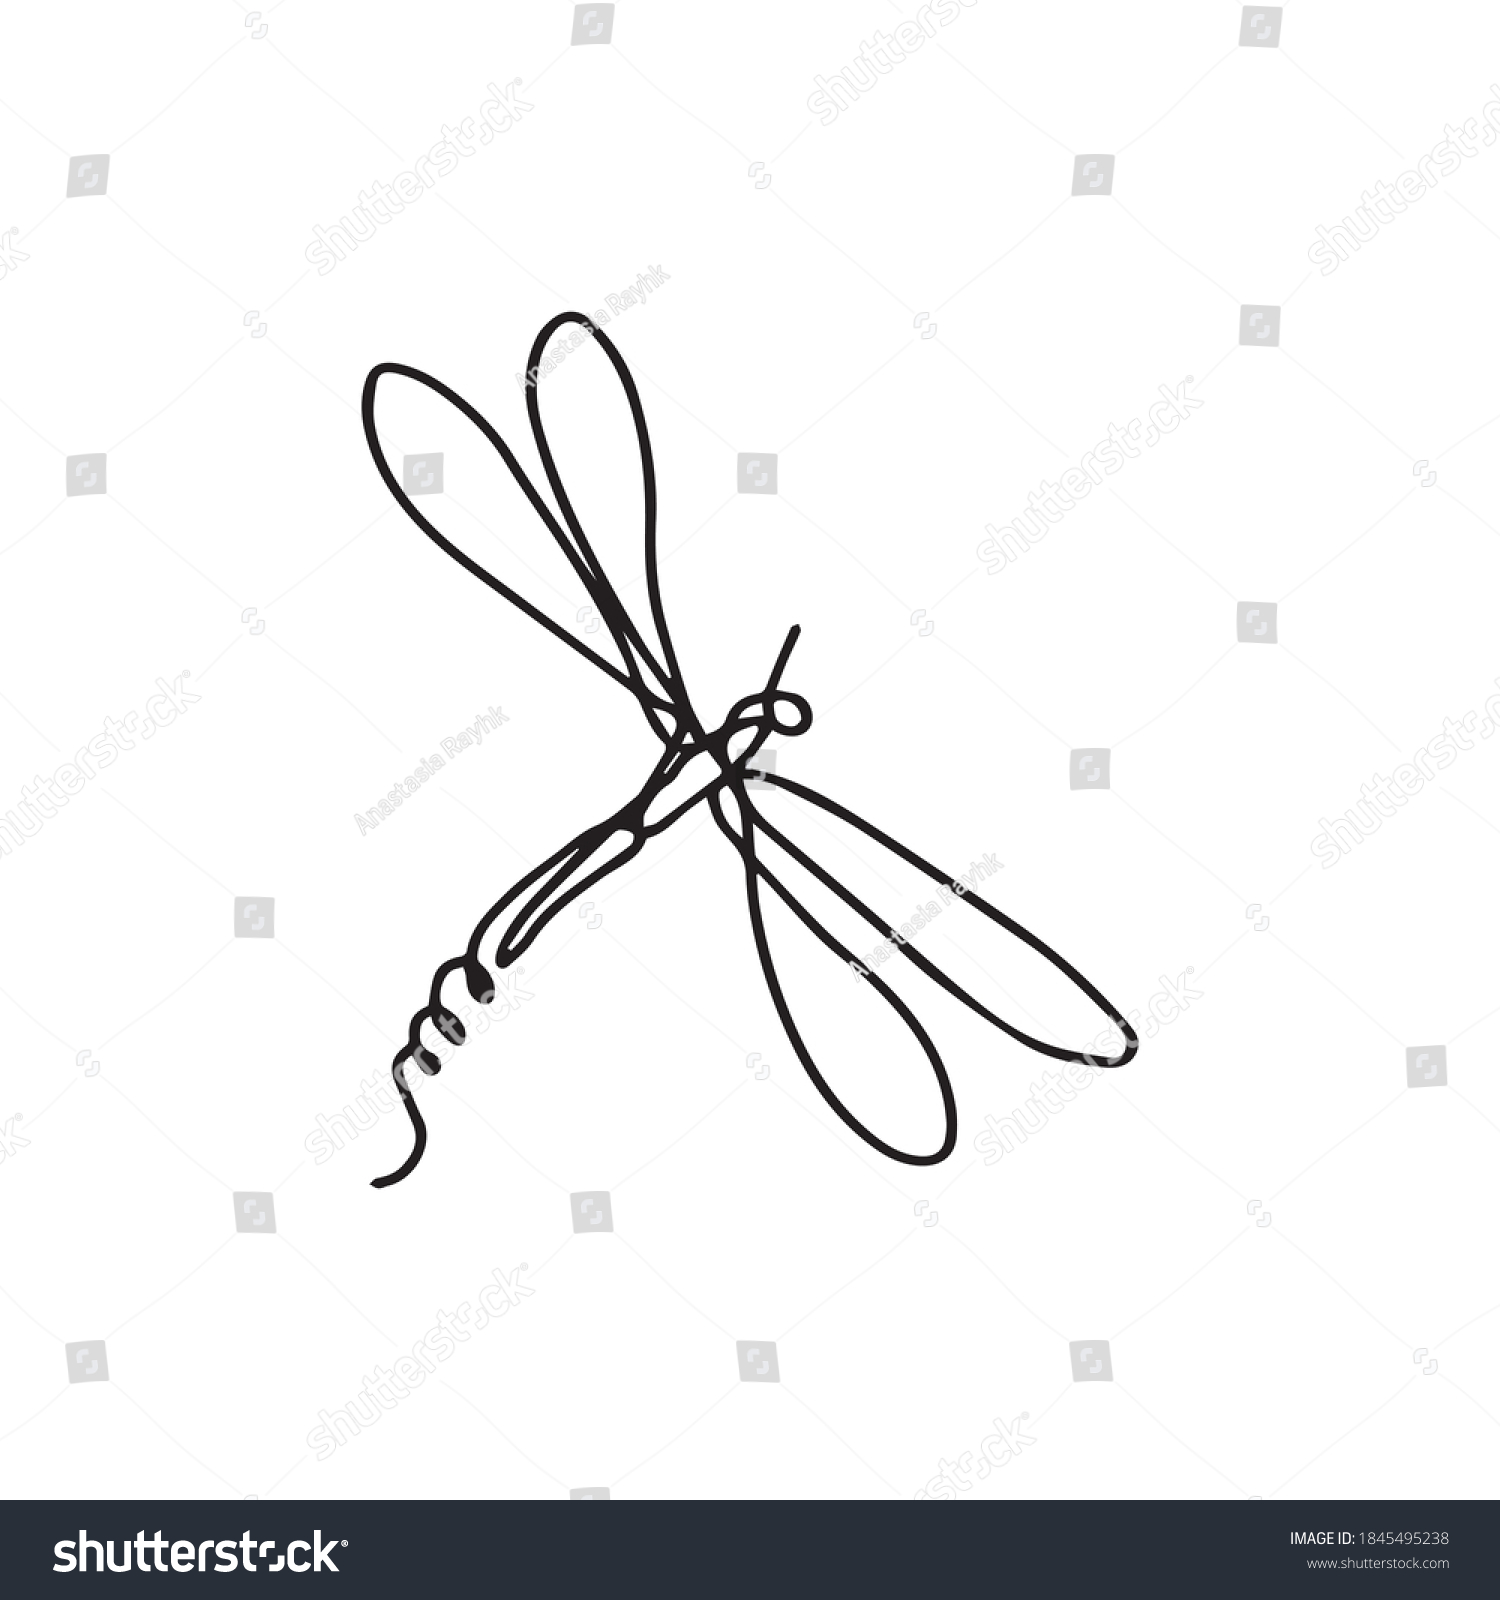 Isolated elements on a white background. Stylized dragonfly. Vector. Drawing in one line. Black and white image. Dragonfly. Insect. Suitable for posters, stickers and postcards. #1845495238